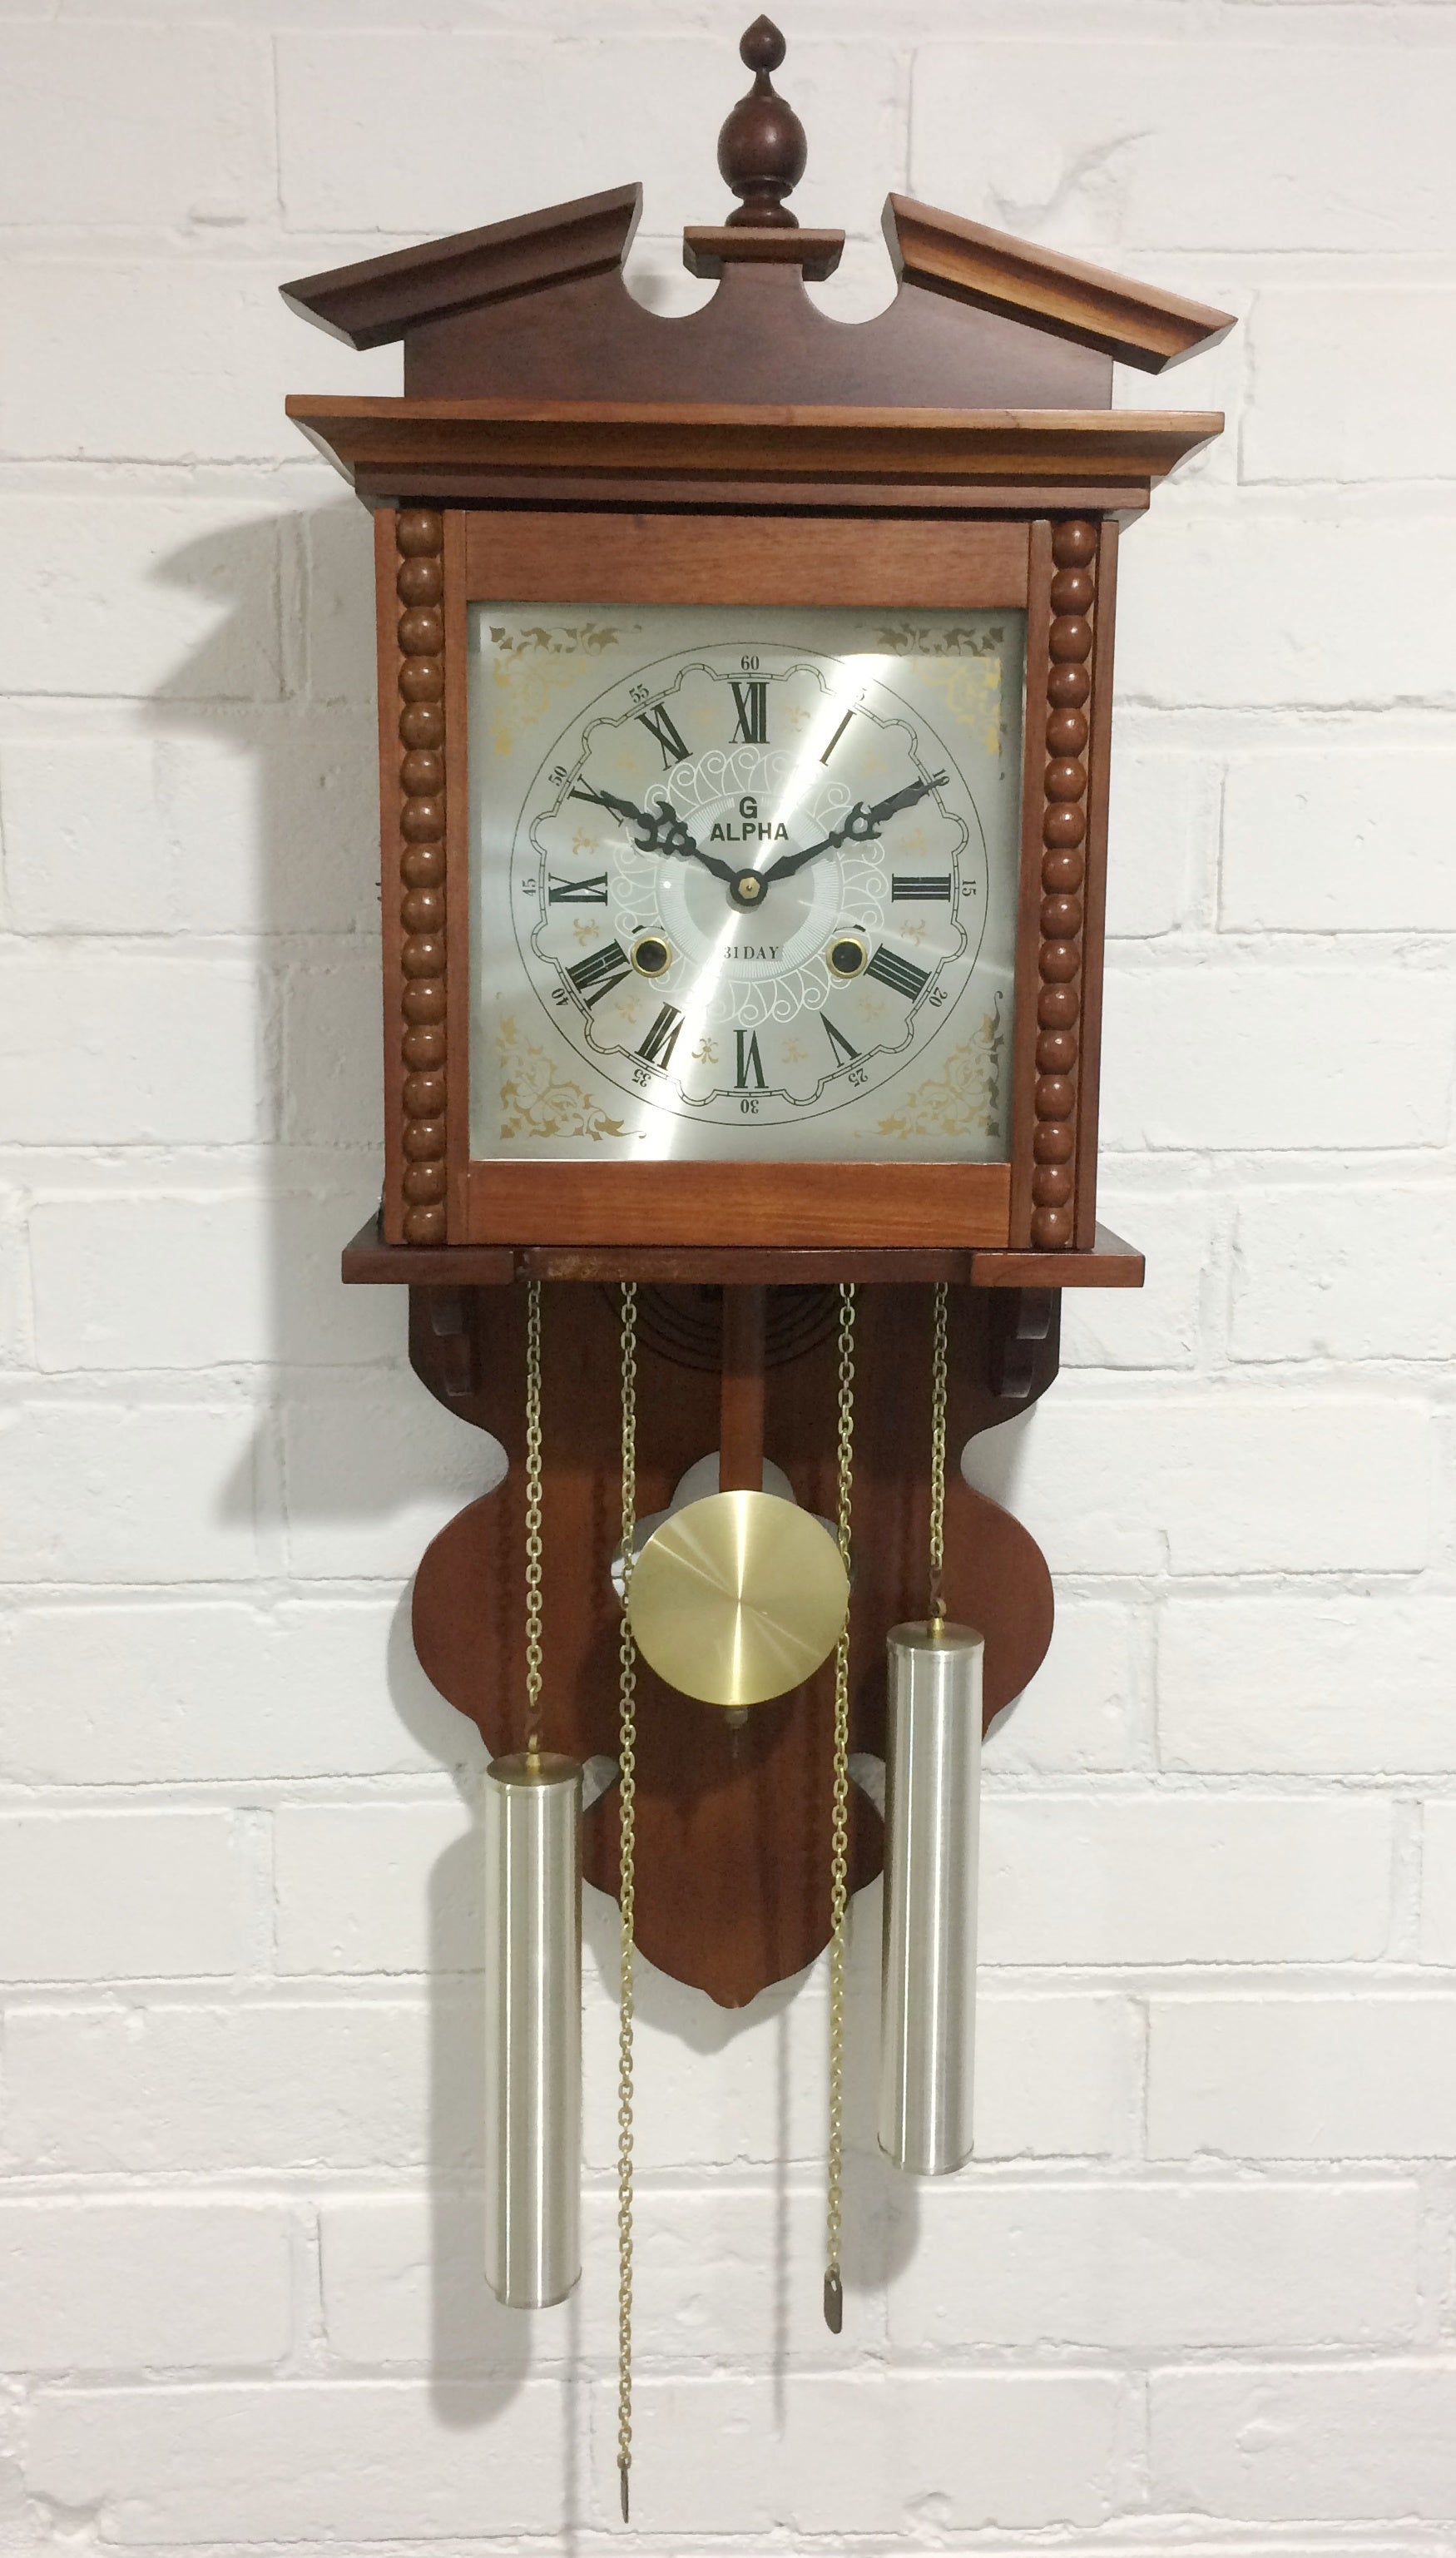 Vintage 31 Day Wall Clock | eXibit collection